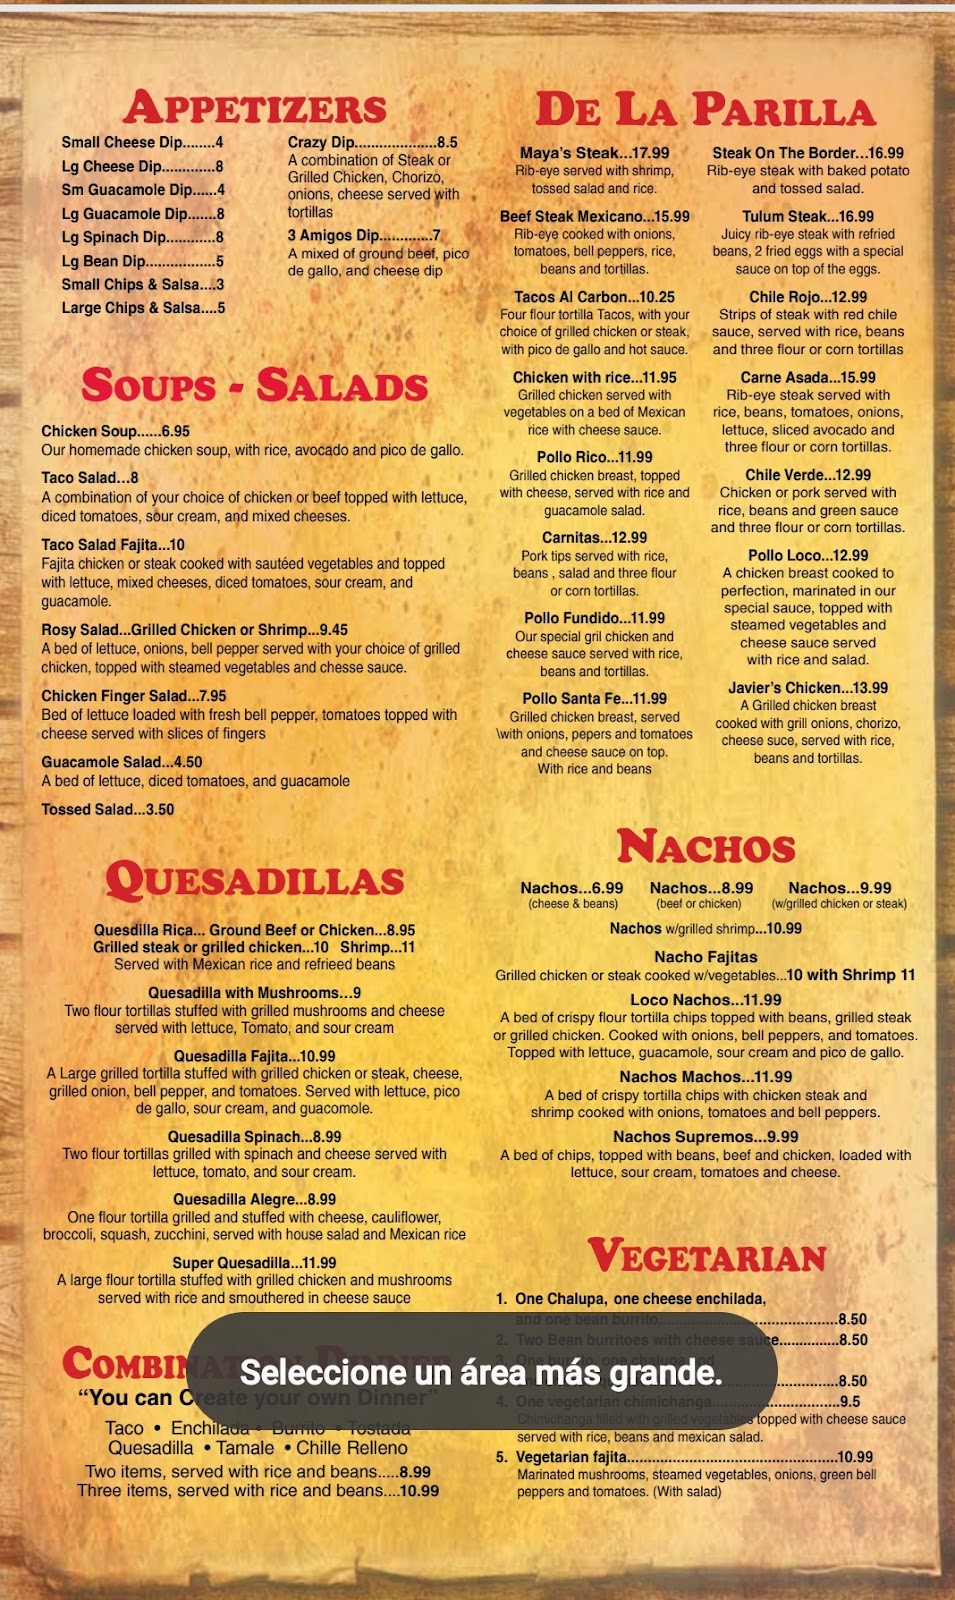 Mayas Mexican Grill | restaurant | 2201 7th Ave N, Pell City, AL 35125, USA | 6596584235 OR +1 659-658-4235